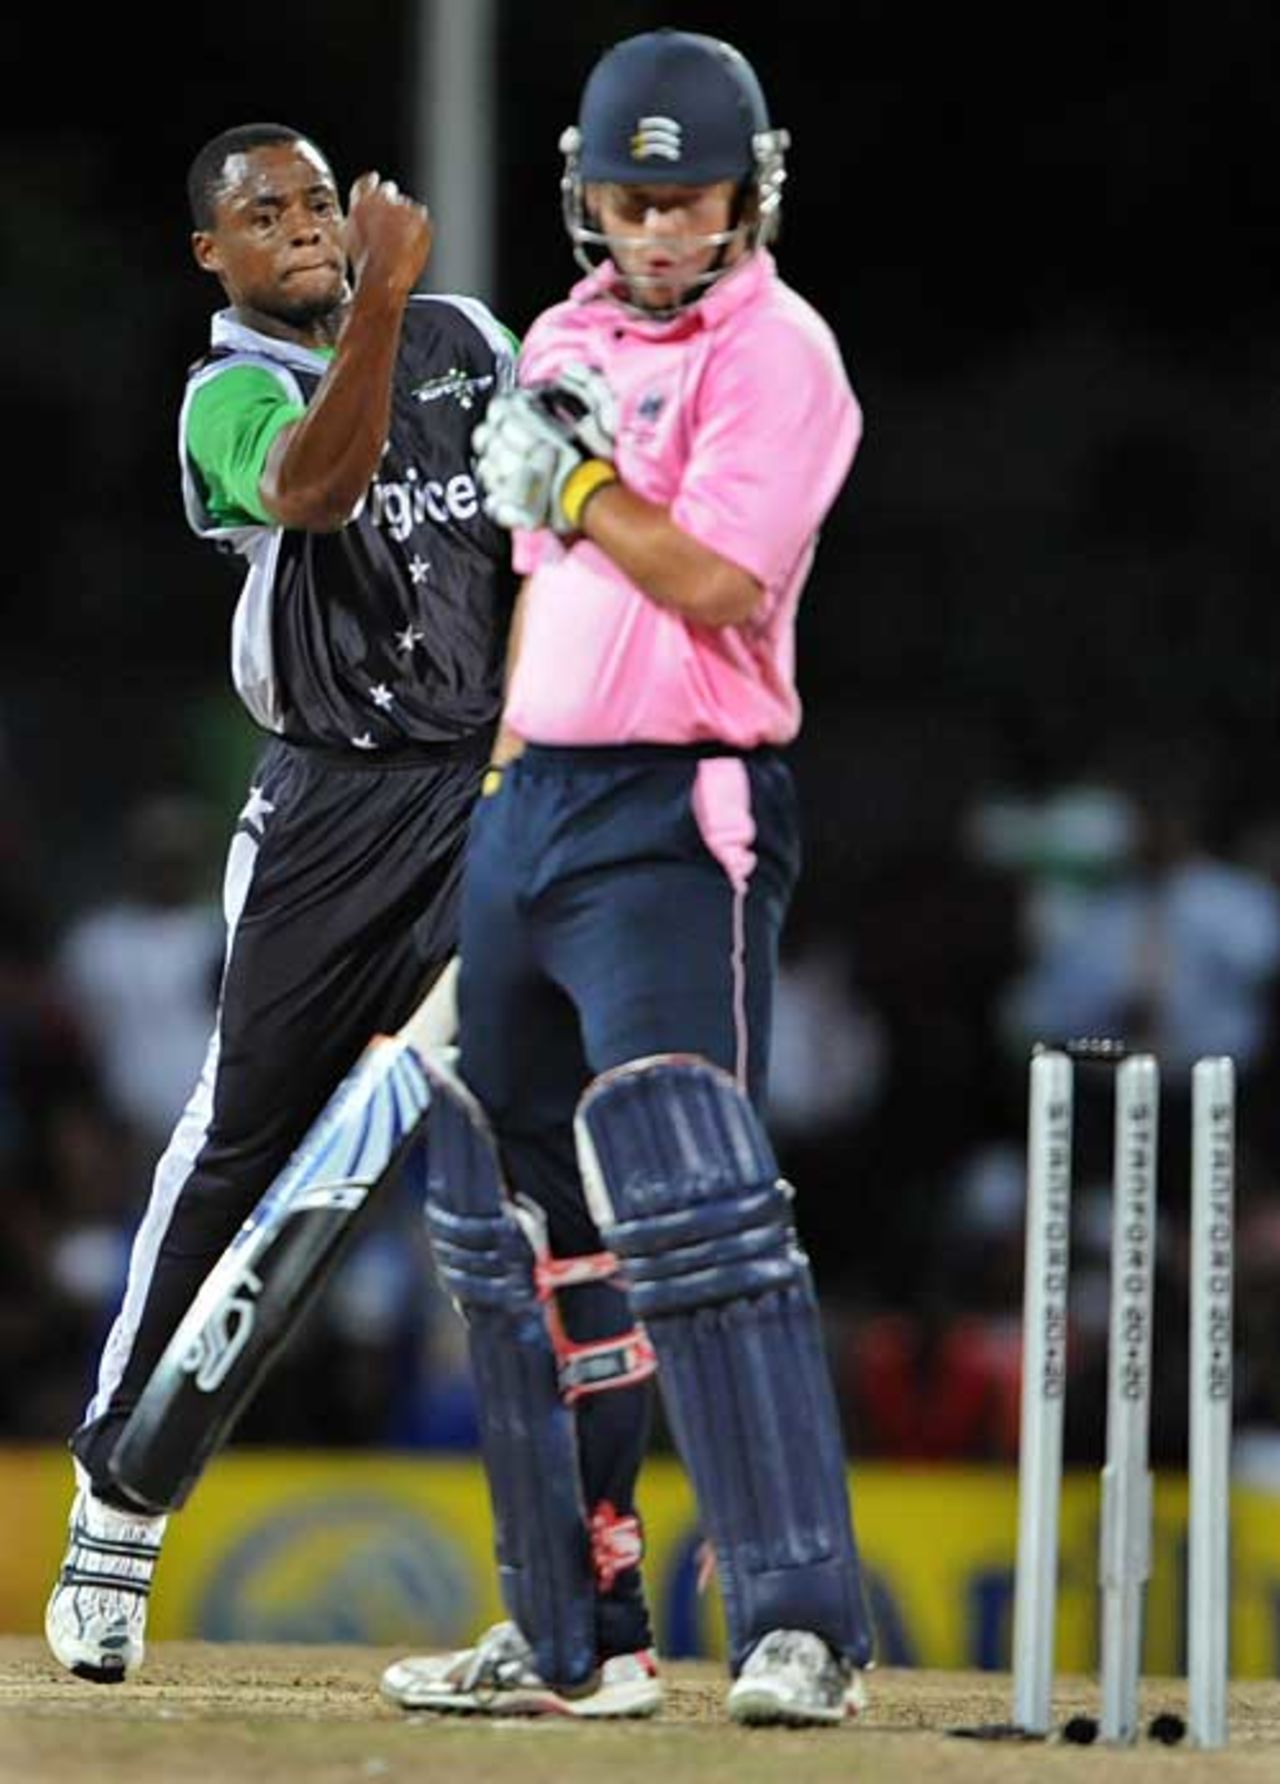 Ed Joyce is bowled off his body by Daren Powell, Stanford Superstars v Middlesex, Antigua, October 30, 2008